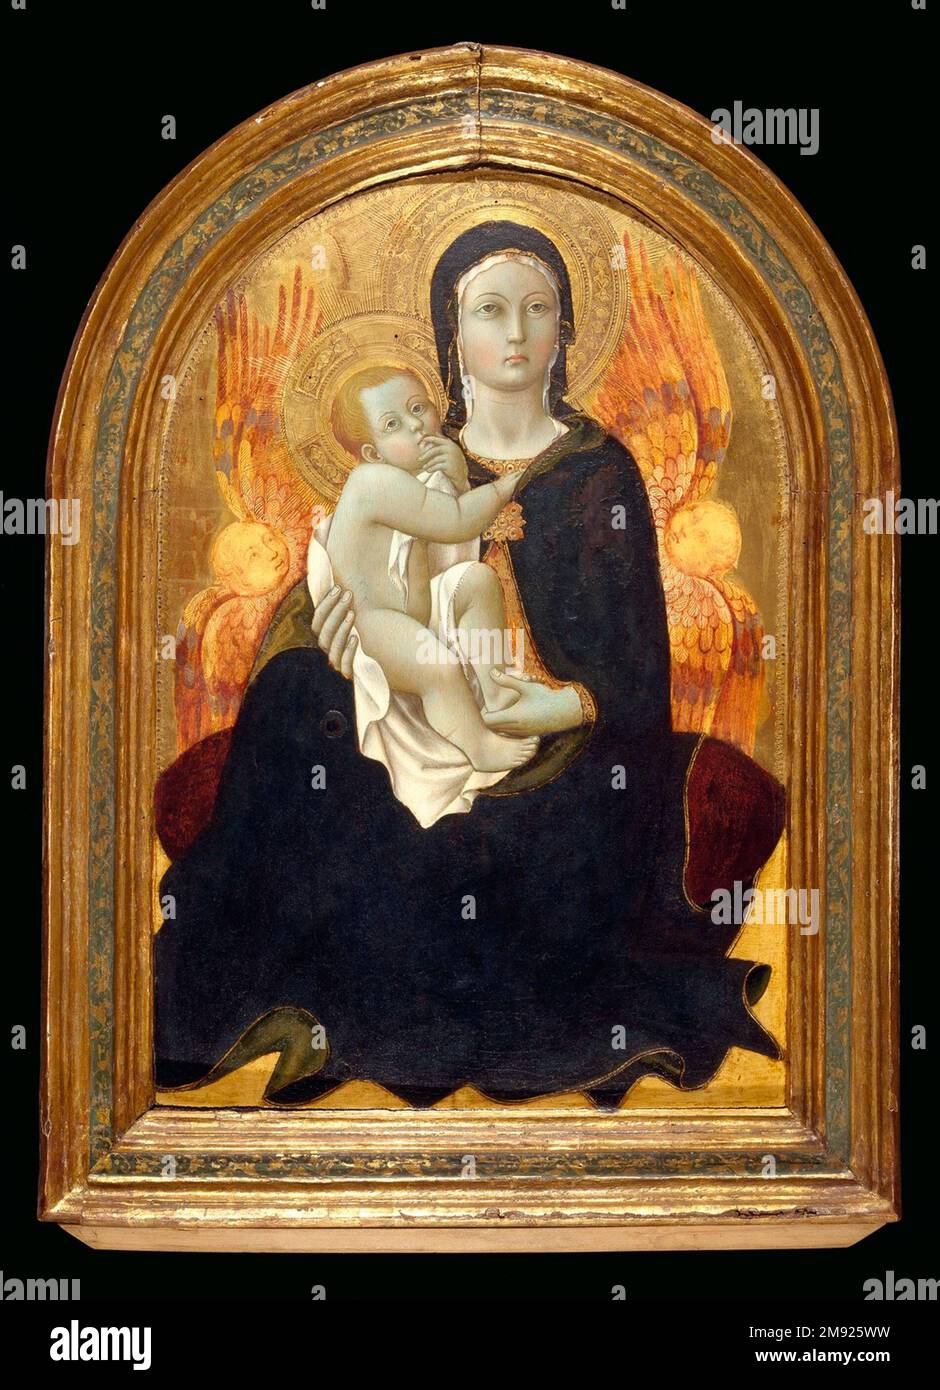 Madonna of Humility Sano di Pietro (Italian, Sienese, 1405-1481). Madonna of Humility, early 1440s. Tempera and tooled gold and silver on panel with engaged frame, 20 7/8 x 14 1/4 in. (53 x 36.2 cm).  This early Madonna is unusual in Sano’s prolific career in that it shows not only the graceful linear forms that characterize Sienese painting, but also the powerful effect of Florentine realism in the pliant muscularity of the Child and the sense of observed reality in the head of the Madonna. The Madonna of Humility refers to images of the Virgin seated modestly on the ground (usually, as here, Stock Photo